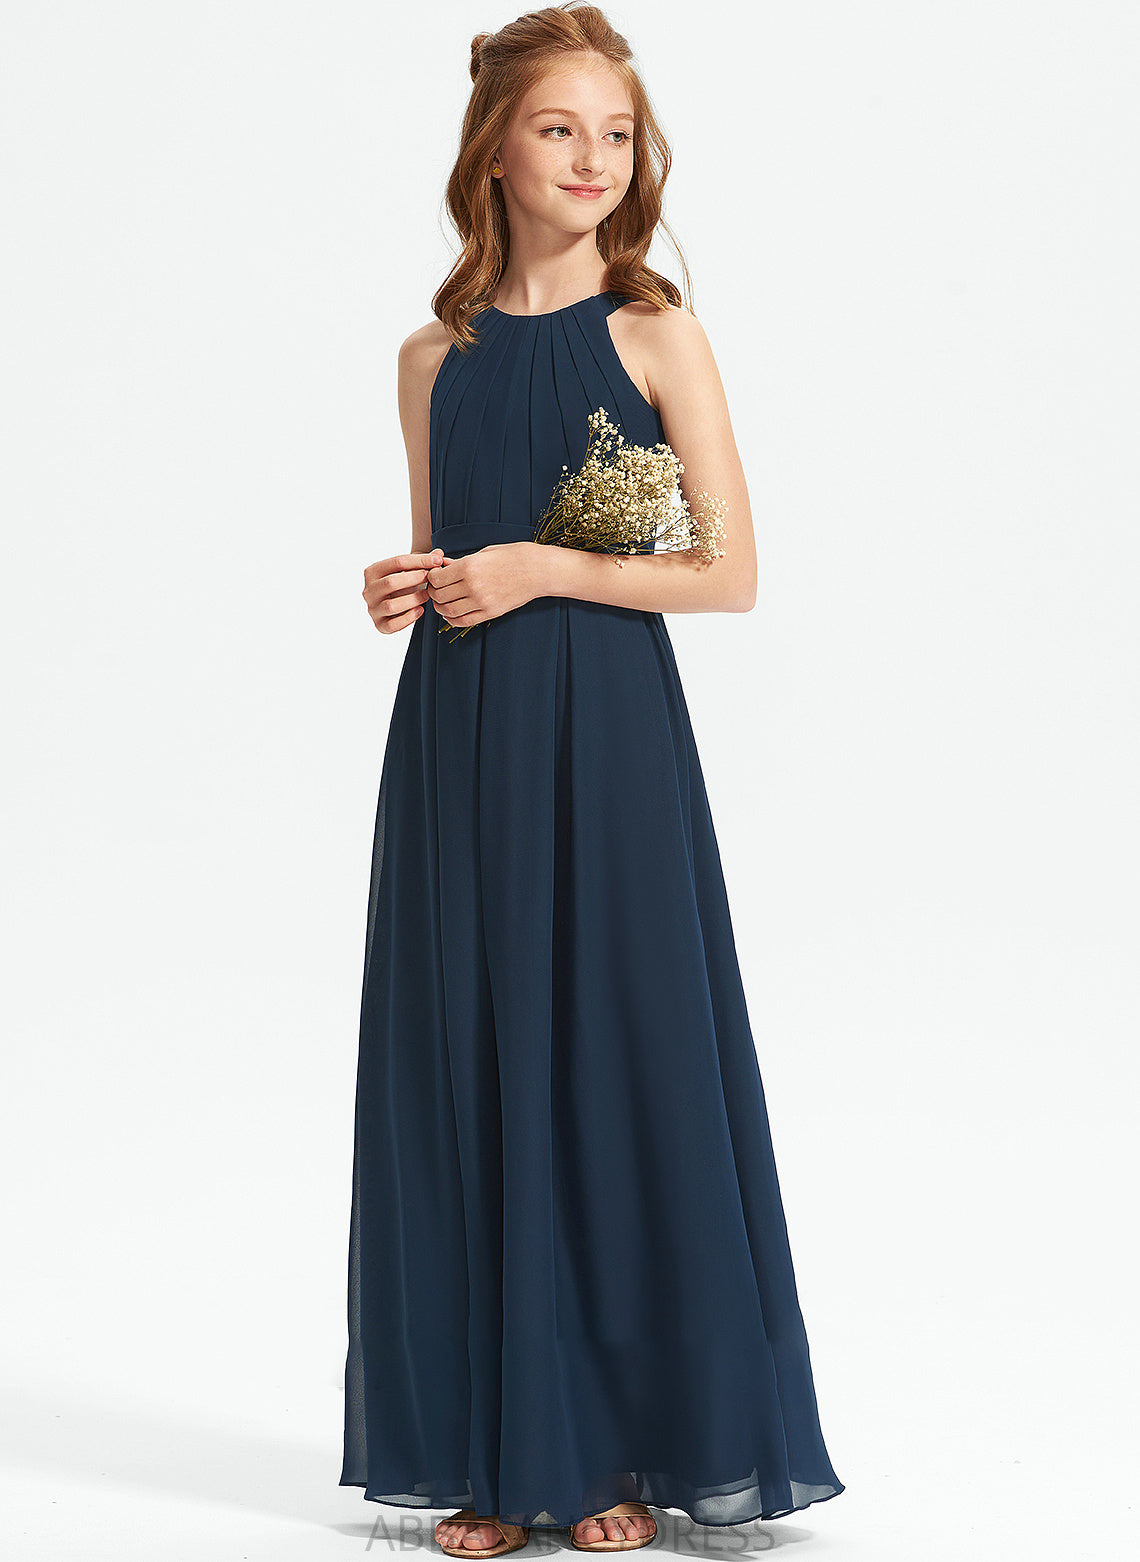 Ruffle Meredith Neck Chiffon With Floor-Length A-Line Junior Bridesmaid Dresses Scoop